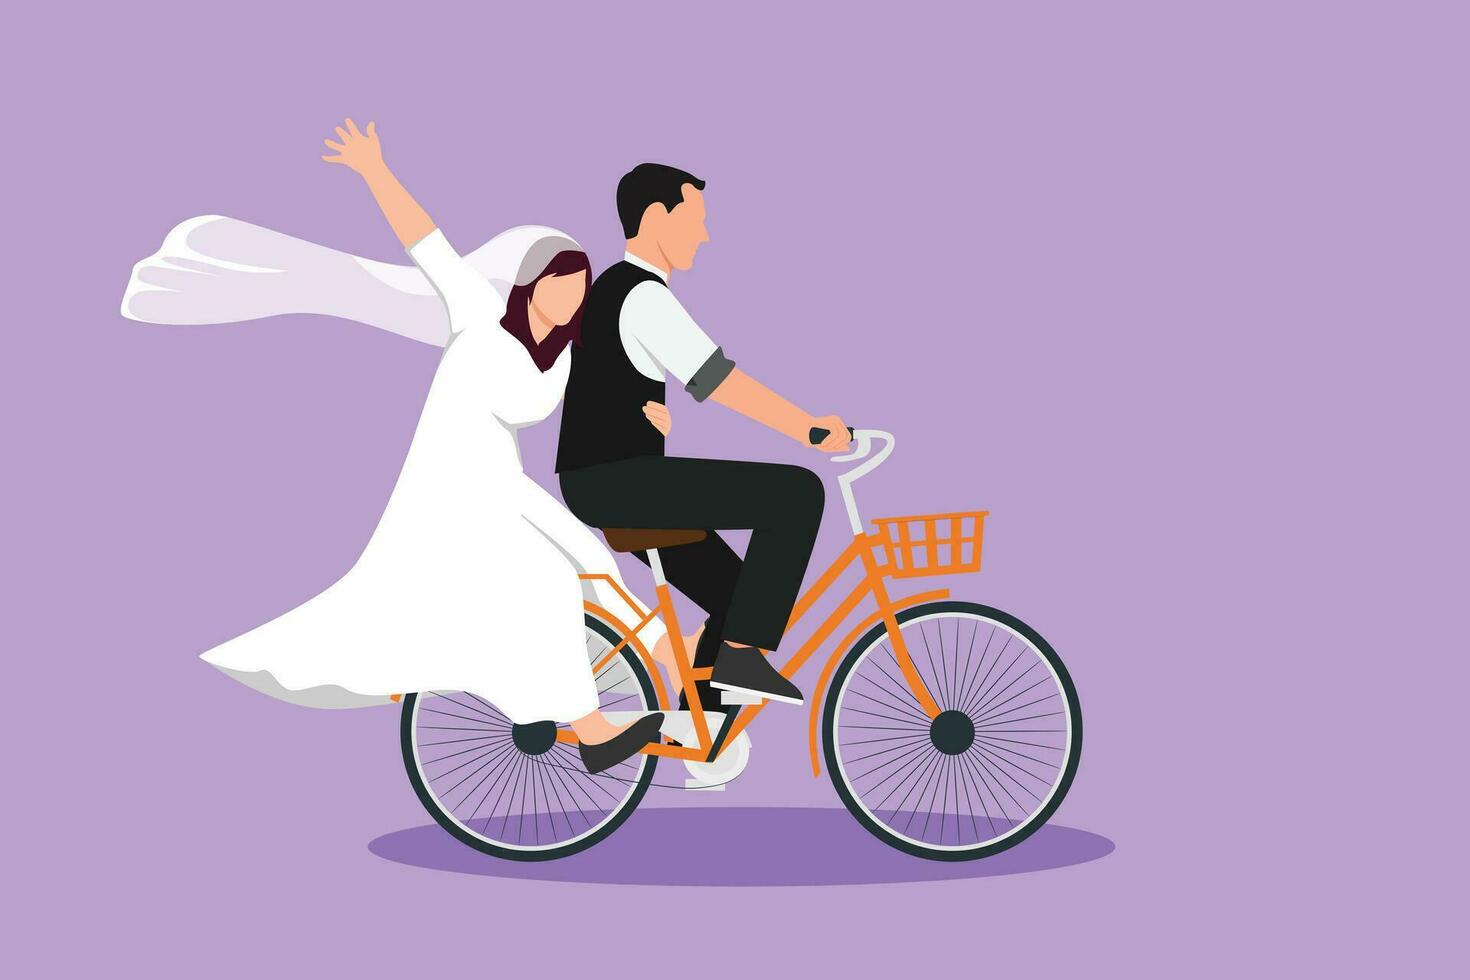 Cartoon flat style drawing happy married couple having fun on date riding bicycle in love at park. Back view of romantic teenage couple ride bike with wedding dress. Graphic design vector illustration